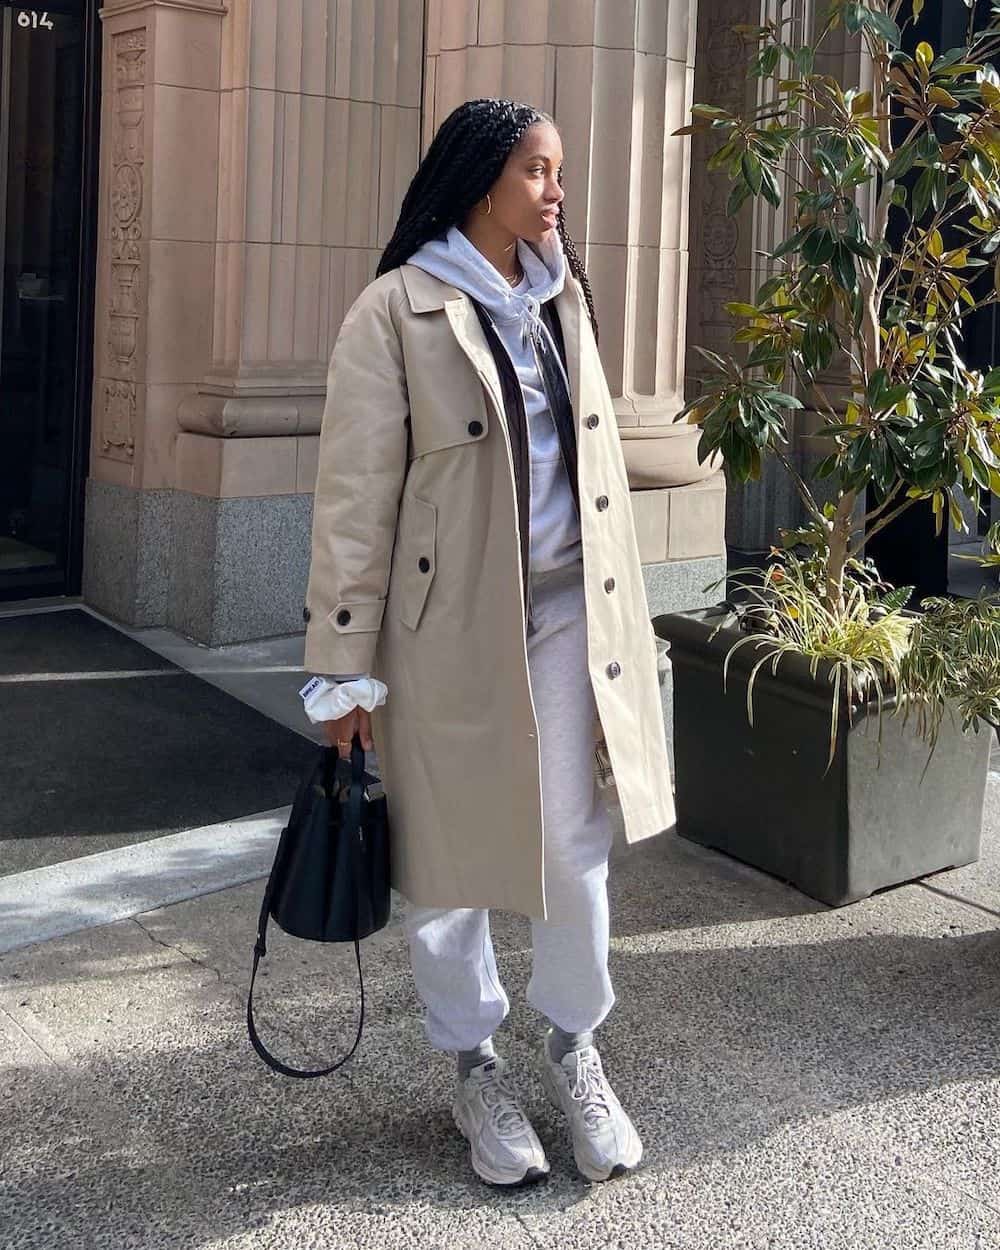 Black woman wearing a light tan trench coat over a grey sweatsuit with sneakers